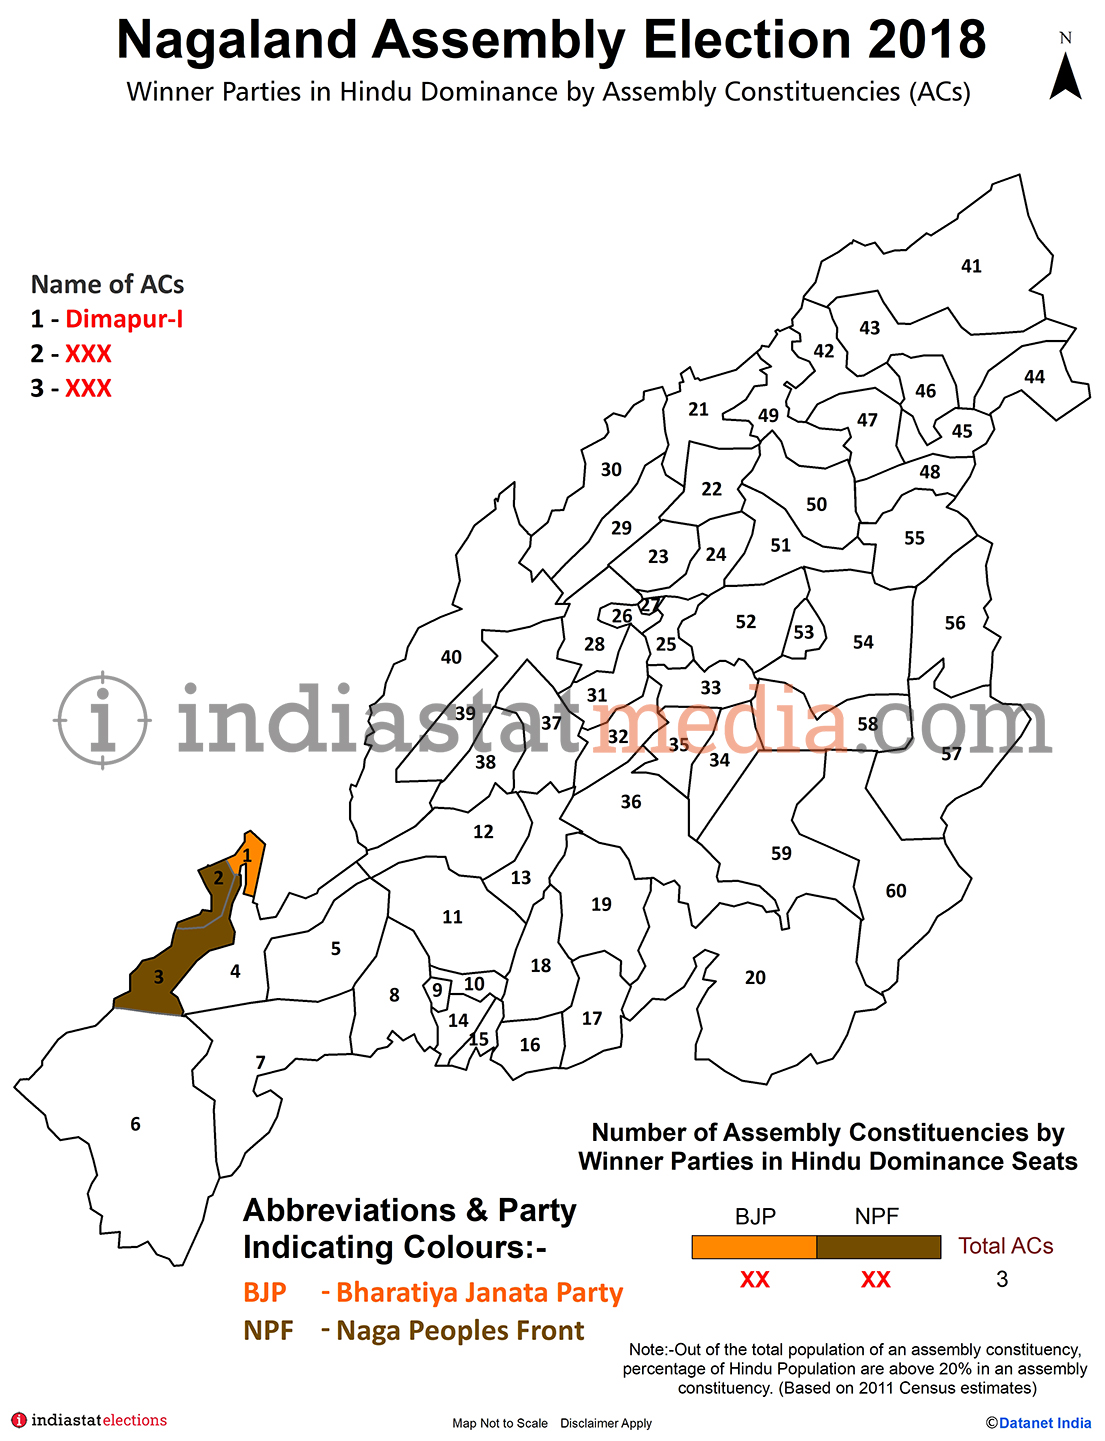 Winner Parties in Hindu Dominance by Constituencies in Nagaland (Assembly Election - 2018)